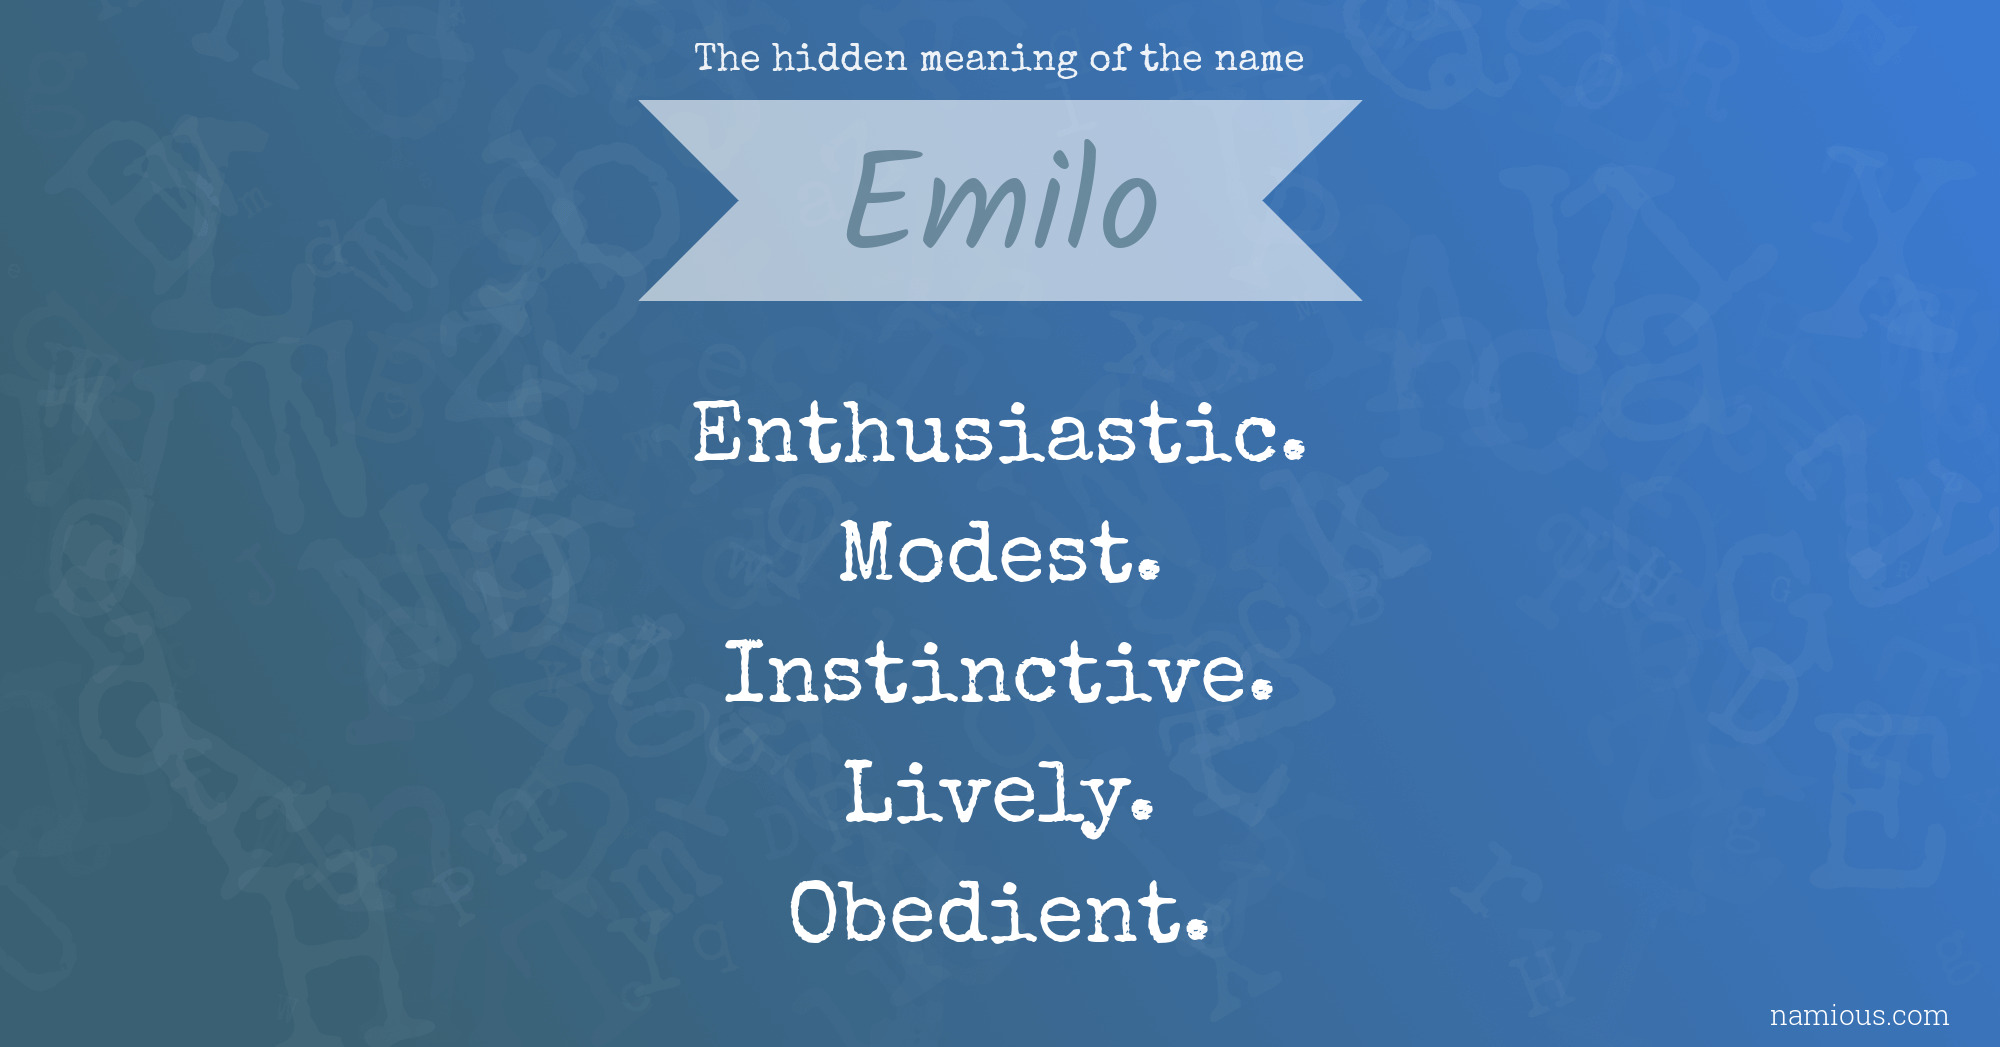 The hidden meaning of the name Emilo